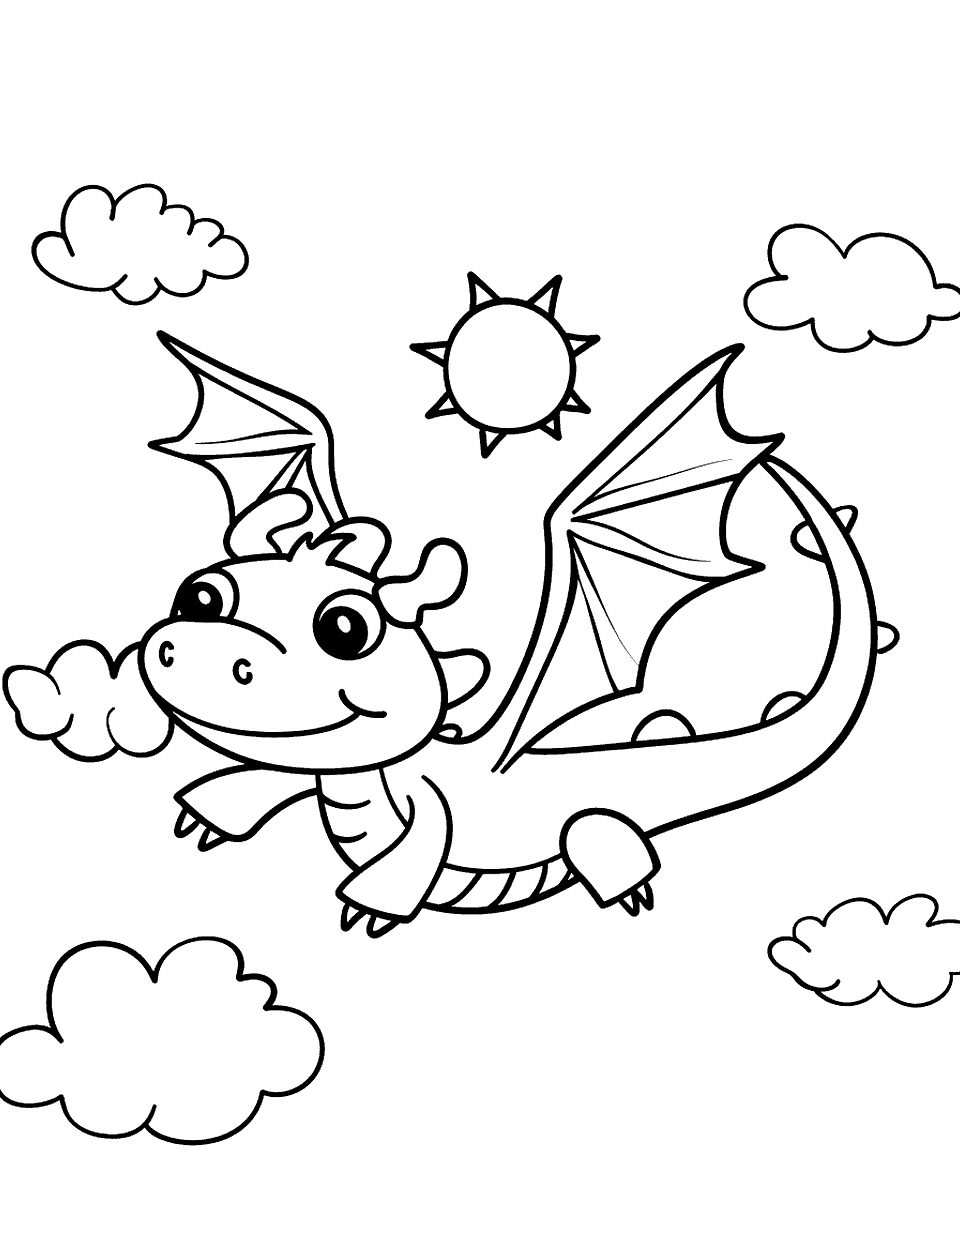 Friendly Dragon in the Clouds Toddler Coloring Page - A cartoon dragon flying through the sky, with clouds and a sun.